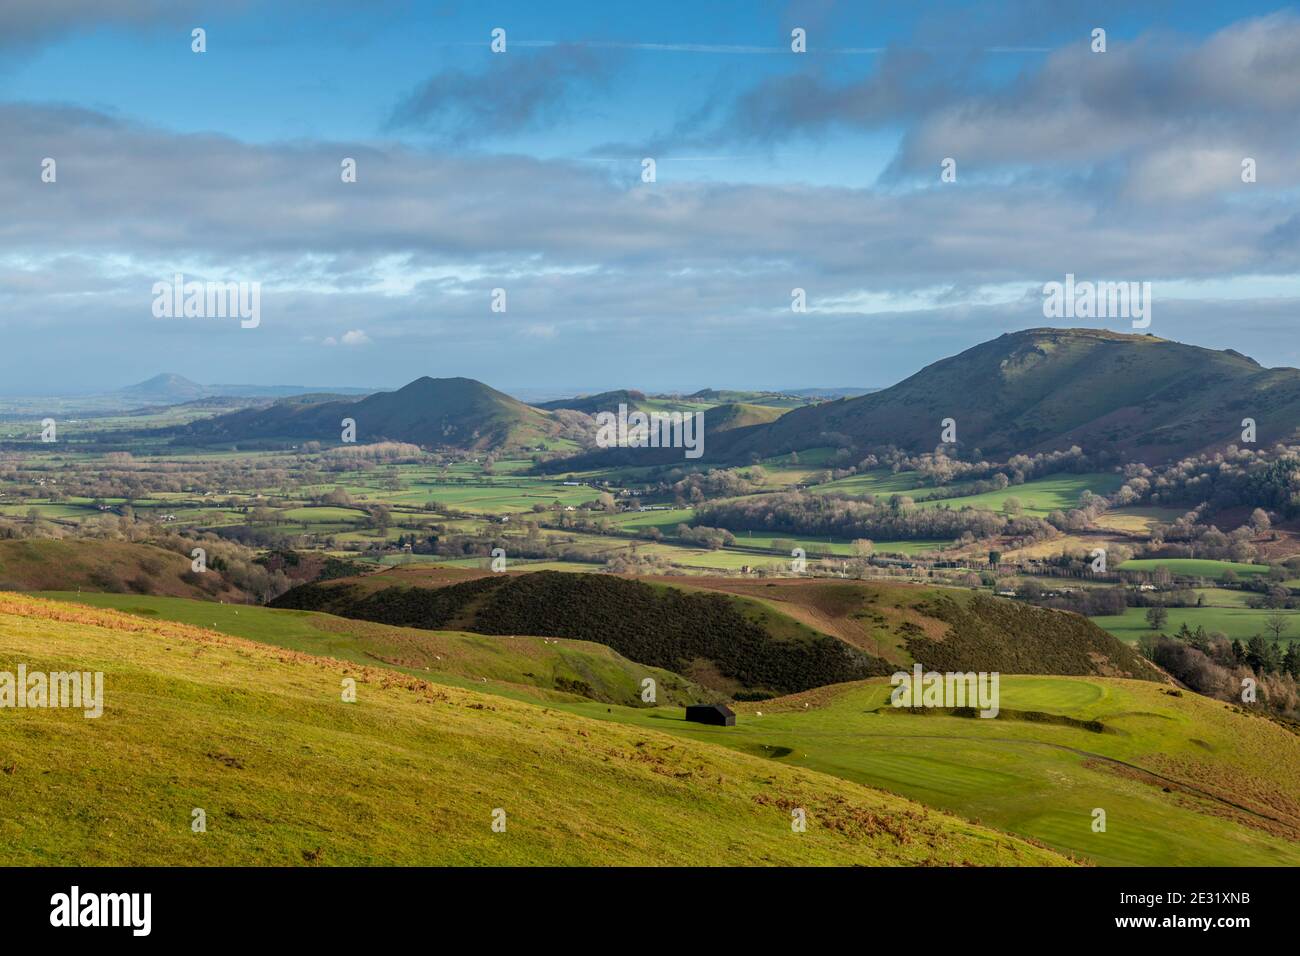 View from the Long Mynd, Shropshire, England, towards Caer Caradoc, The Lawley, with The Wrekin in the distance. Stock Photo